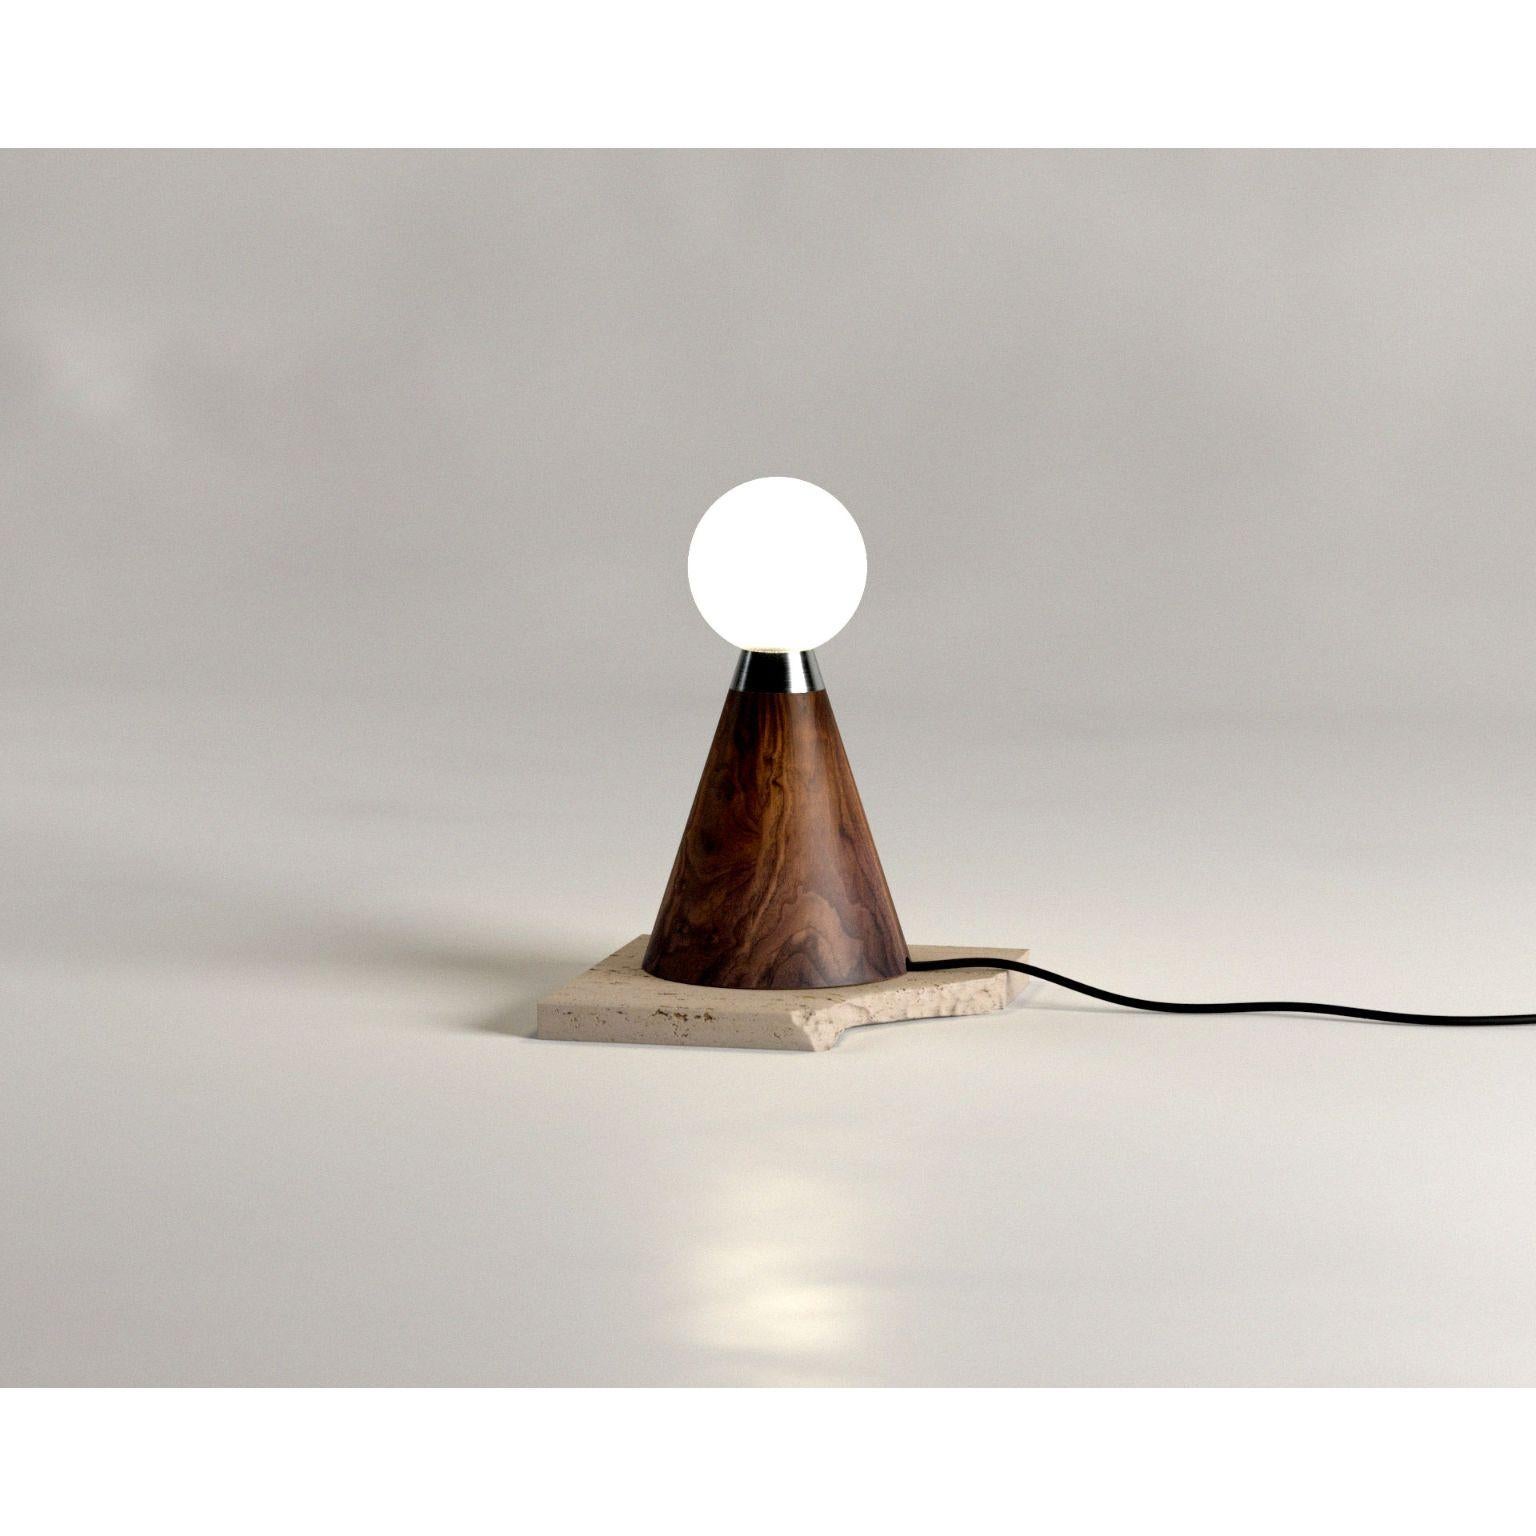 Mercurio Lamp Walnut by Siete Studio
Dimensions: D 20 x W 20 x H 36 cm.
Materials: Walnut, hand-blown glass.

Mercurio is a sculptural table lamp characterized by its balanced geometric form and simplistic appearance. The base references totemic